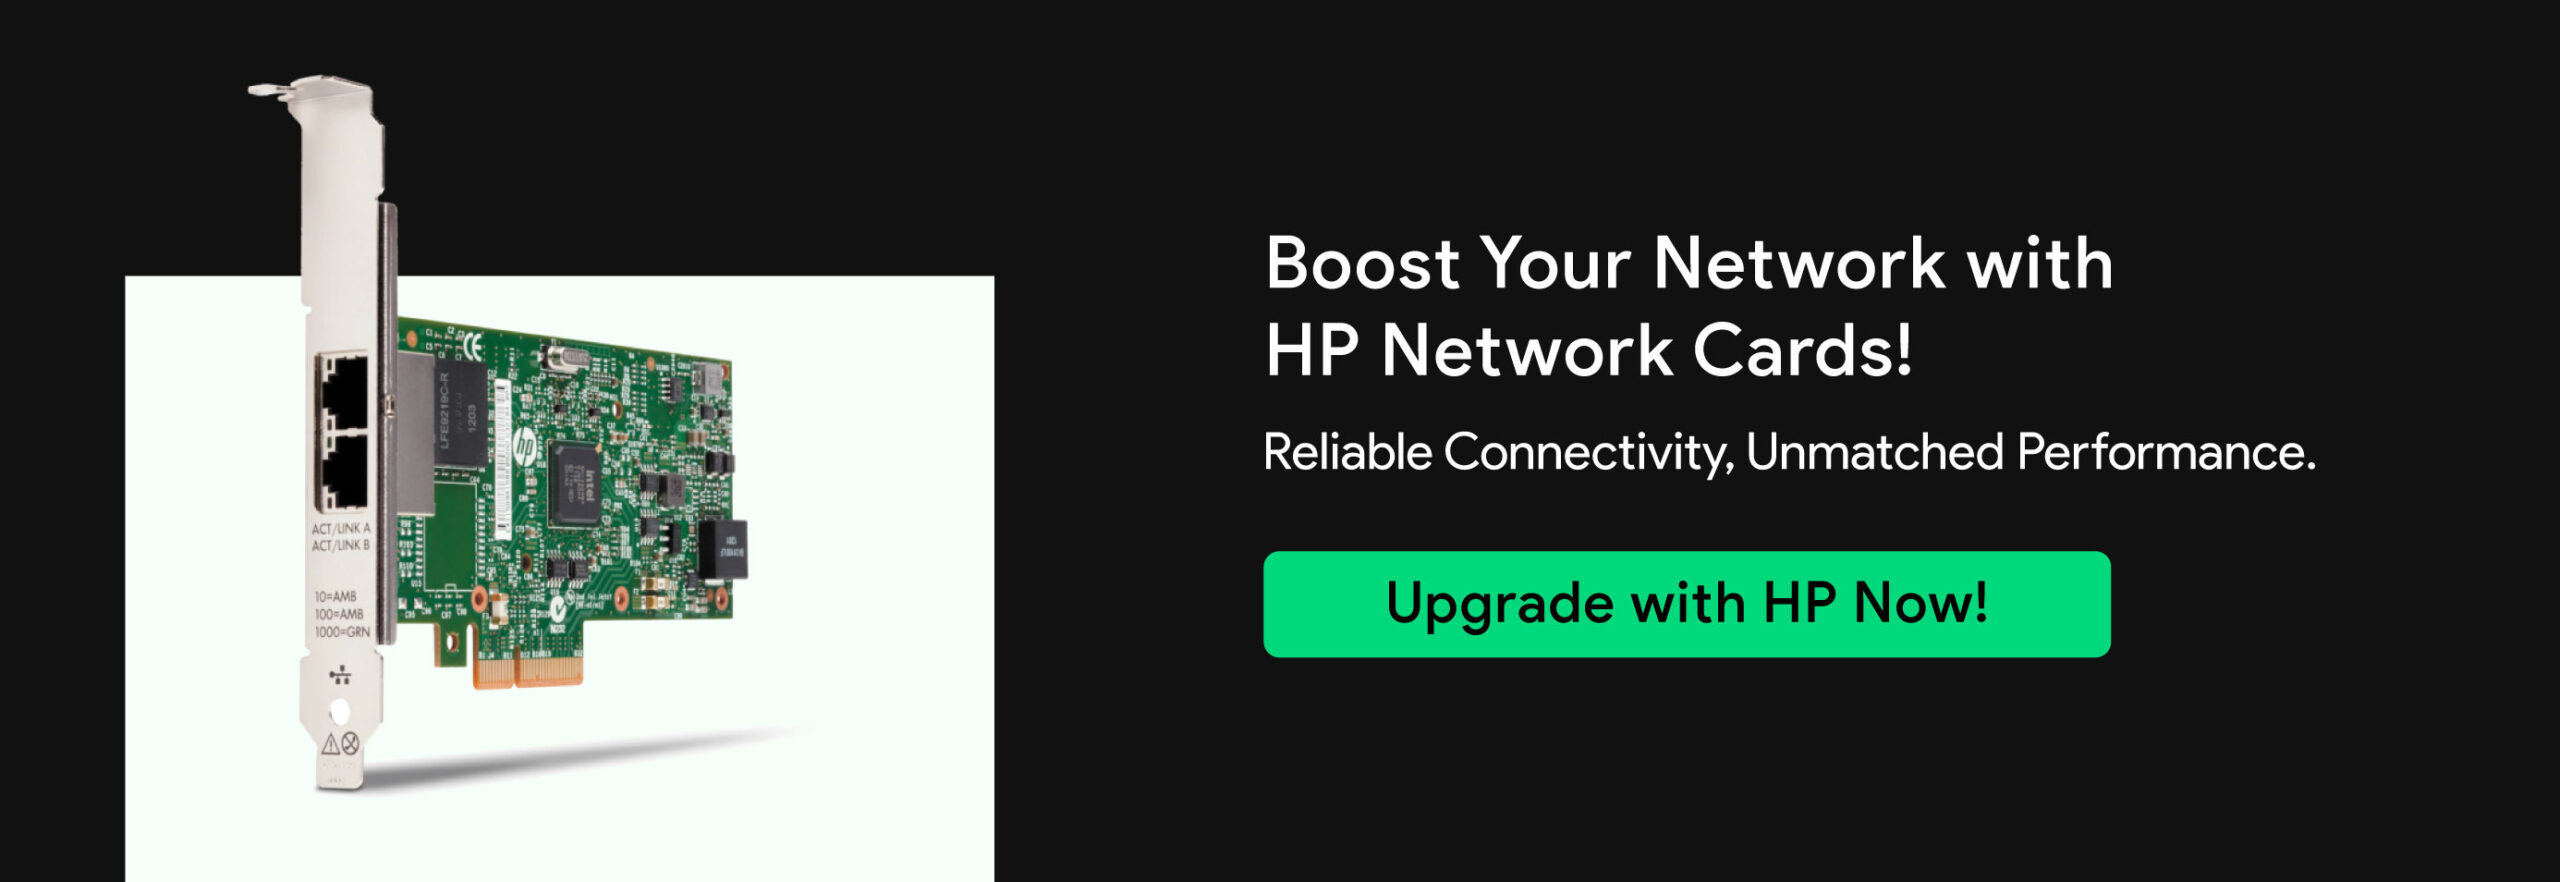 HP-Network-Cards